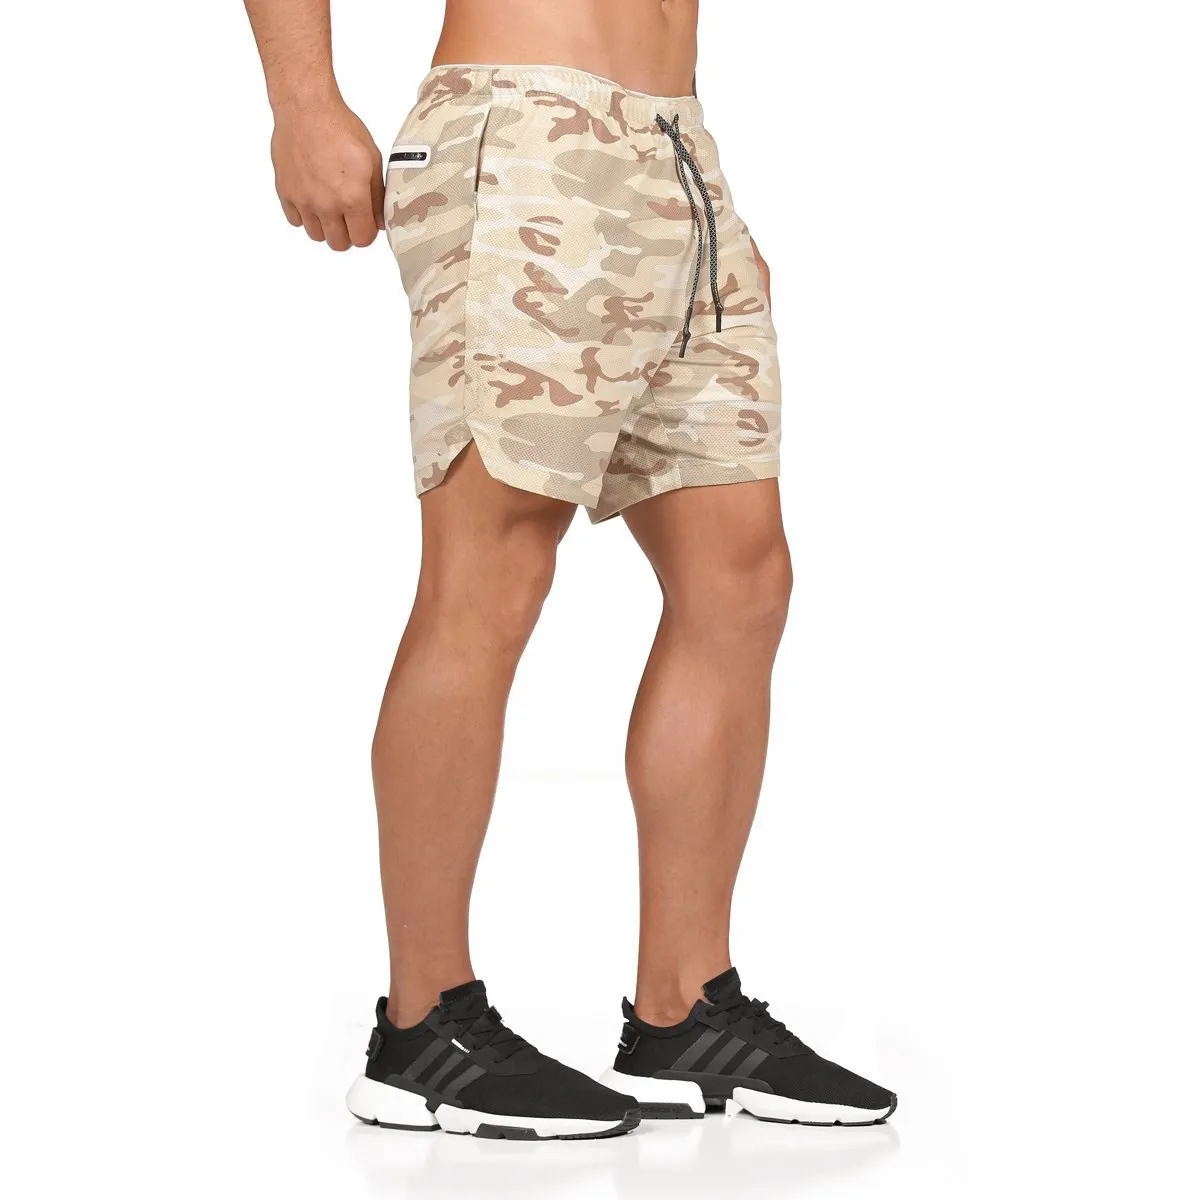 Double Layer Shorts Men Quick-drying Breathable Running Camouflage Men Shorts Sports Training Fitness Short Pants Built-in pocke